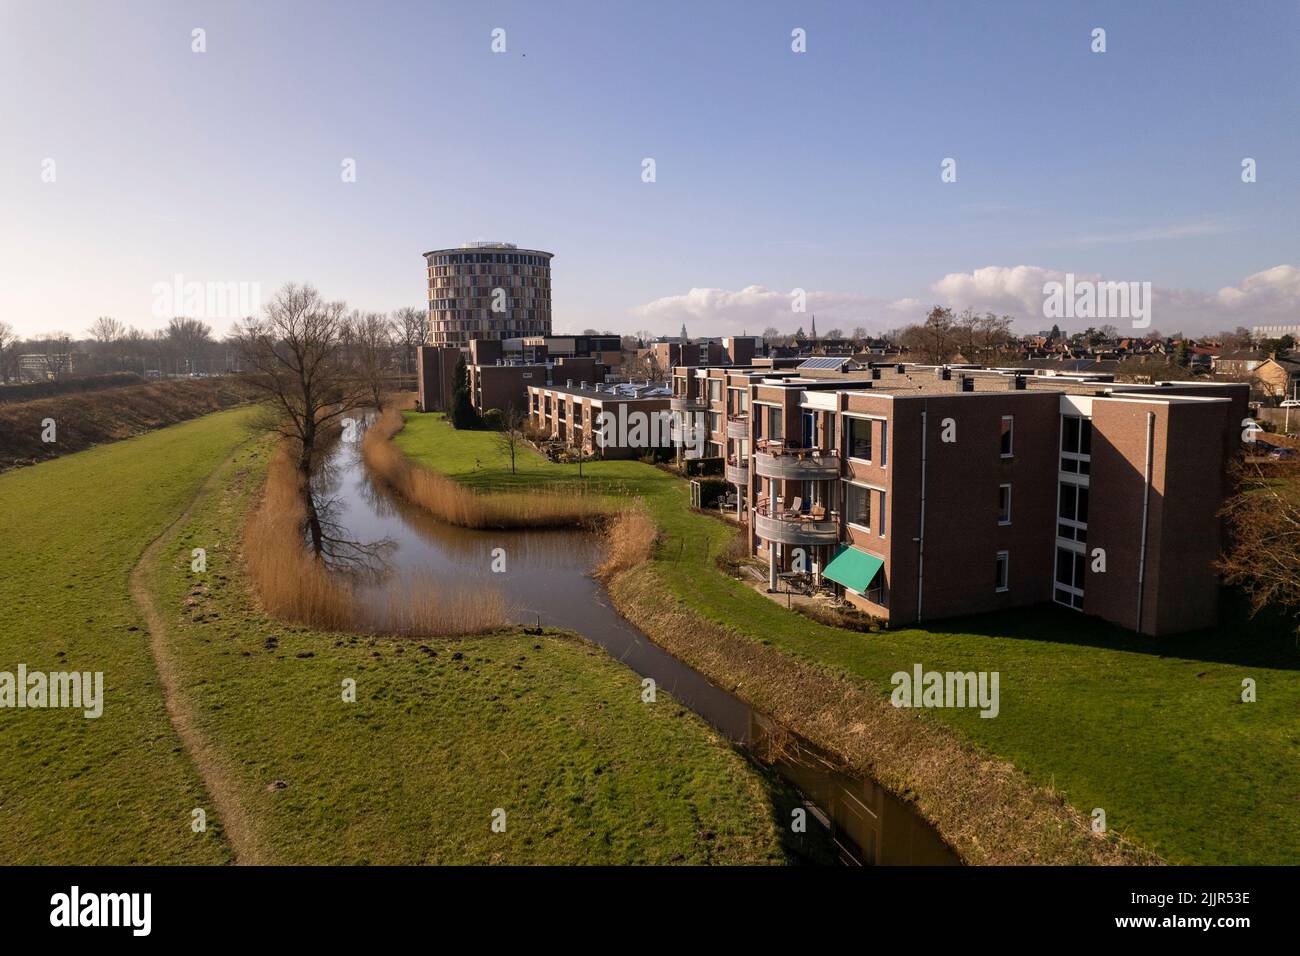 Colorful service flat in Dutch landscape of tower town Zutphen with park and residential neighbourhood. Stock Photo